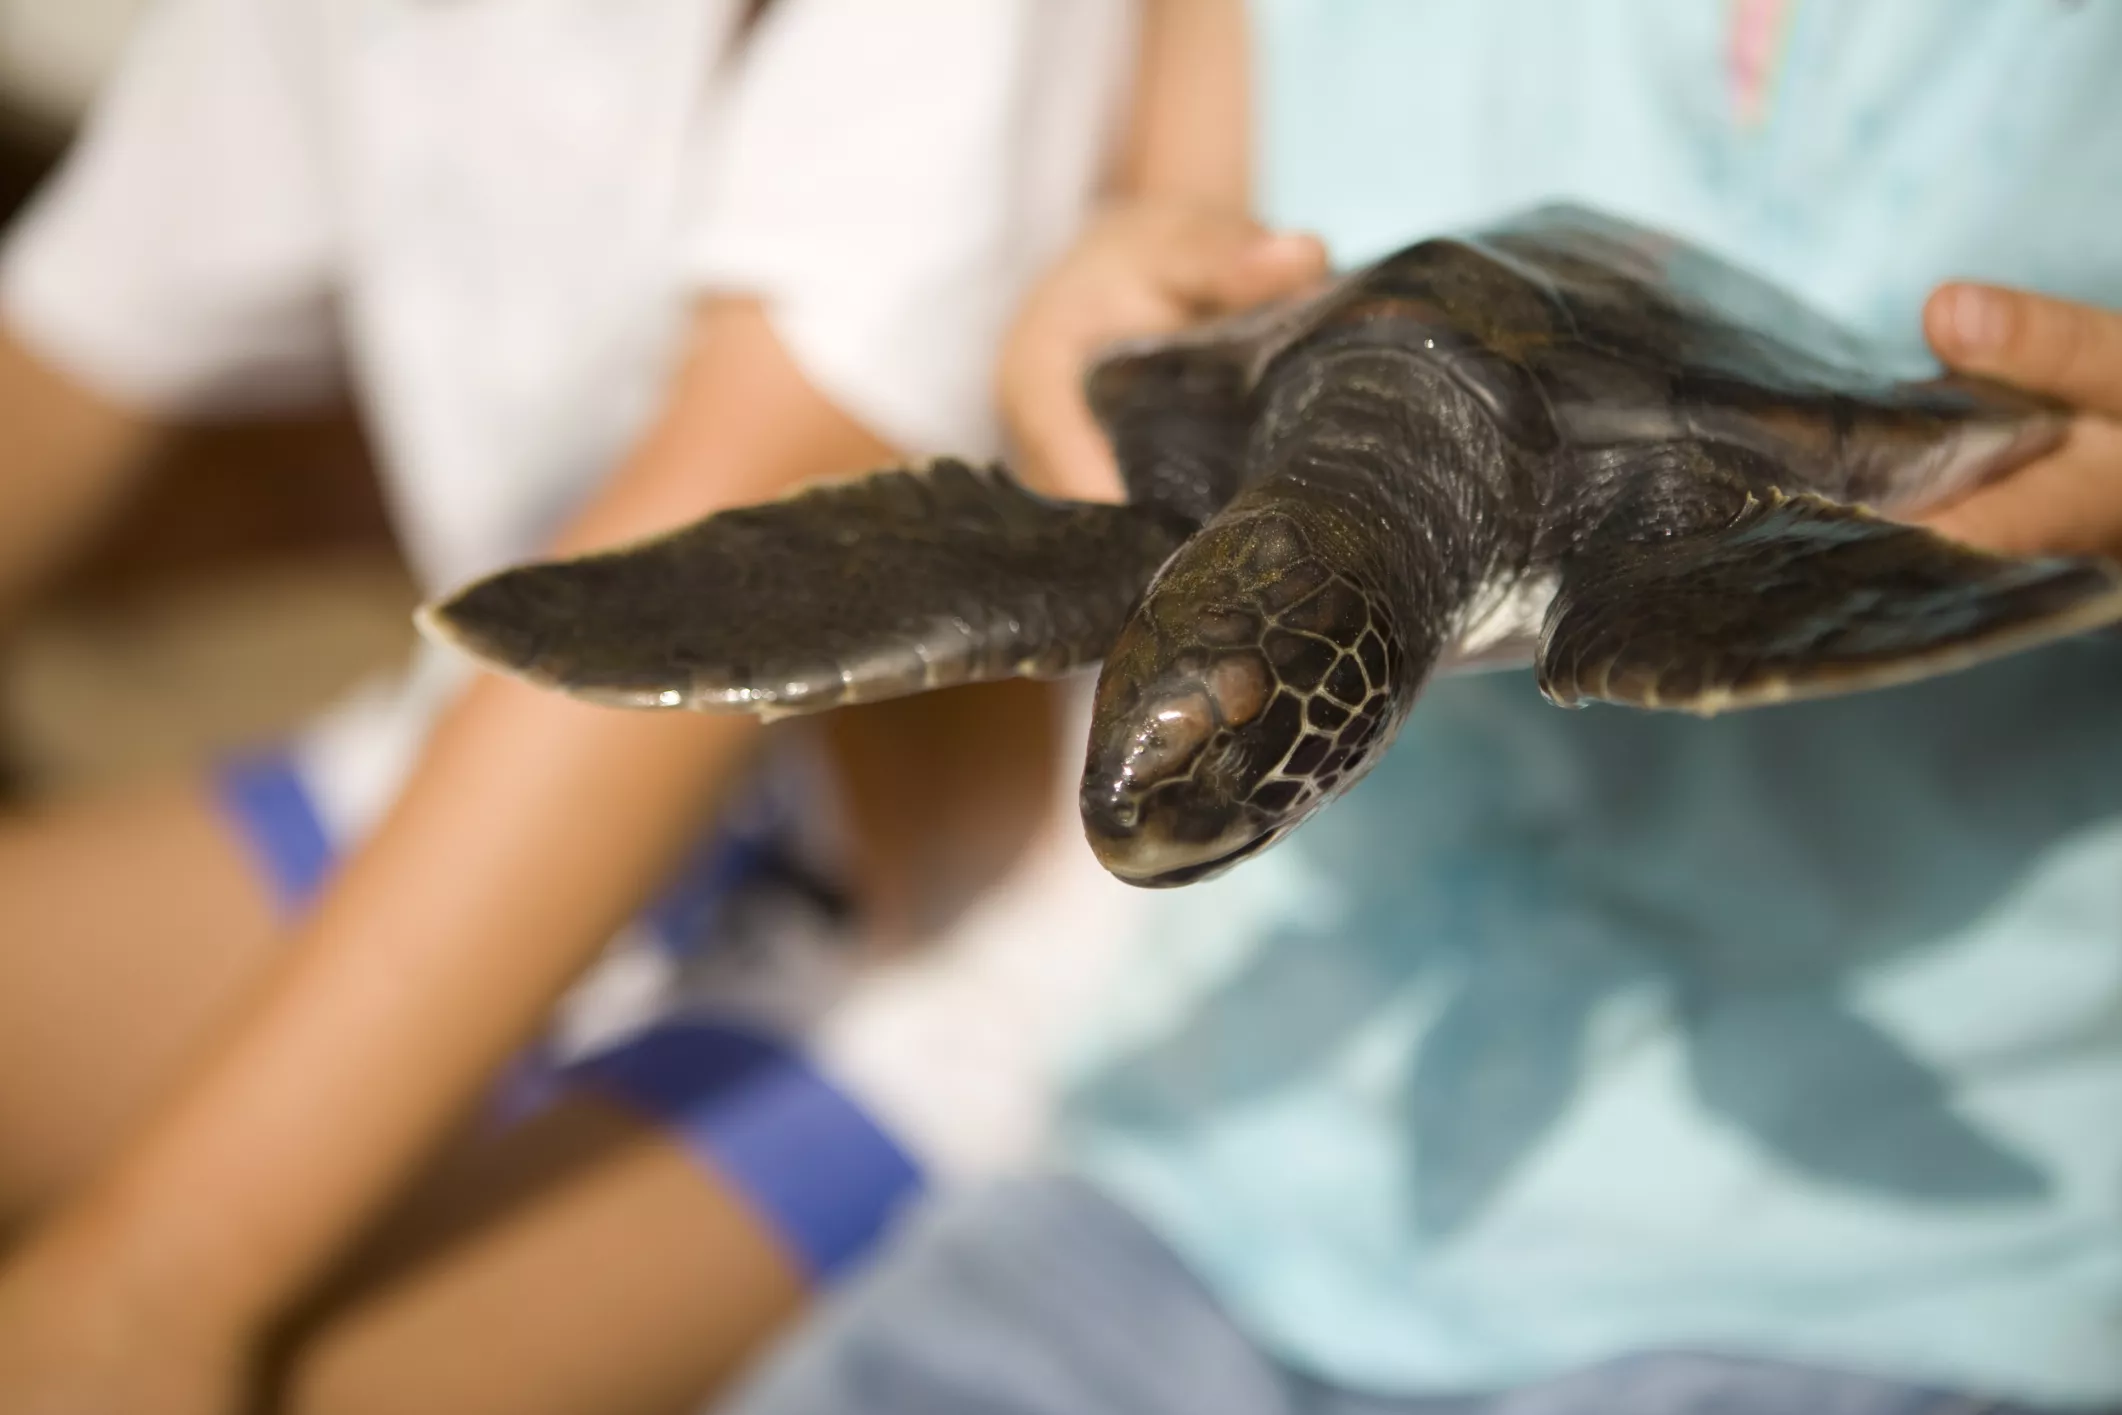 Baby hawksbill turtle after being rescued.